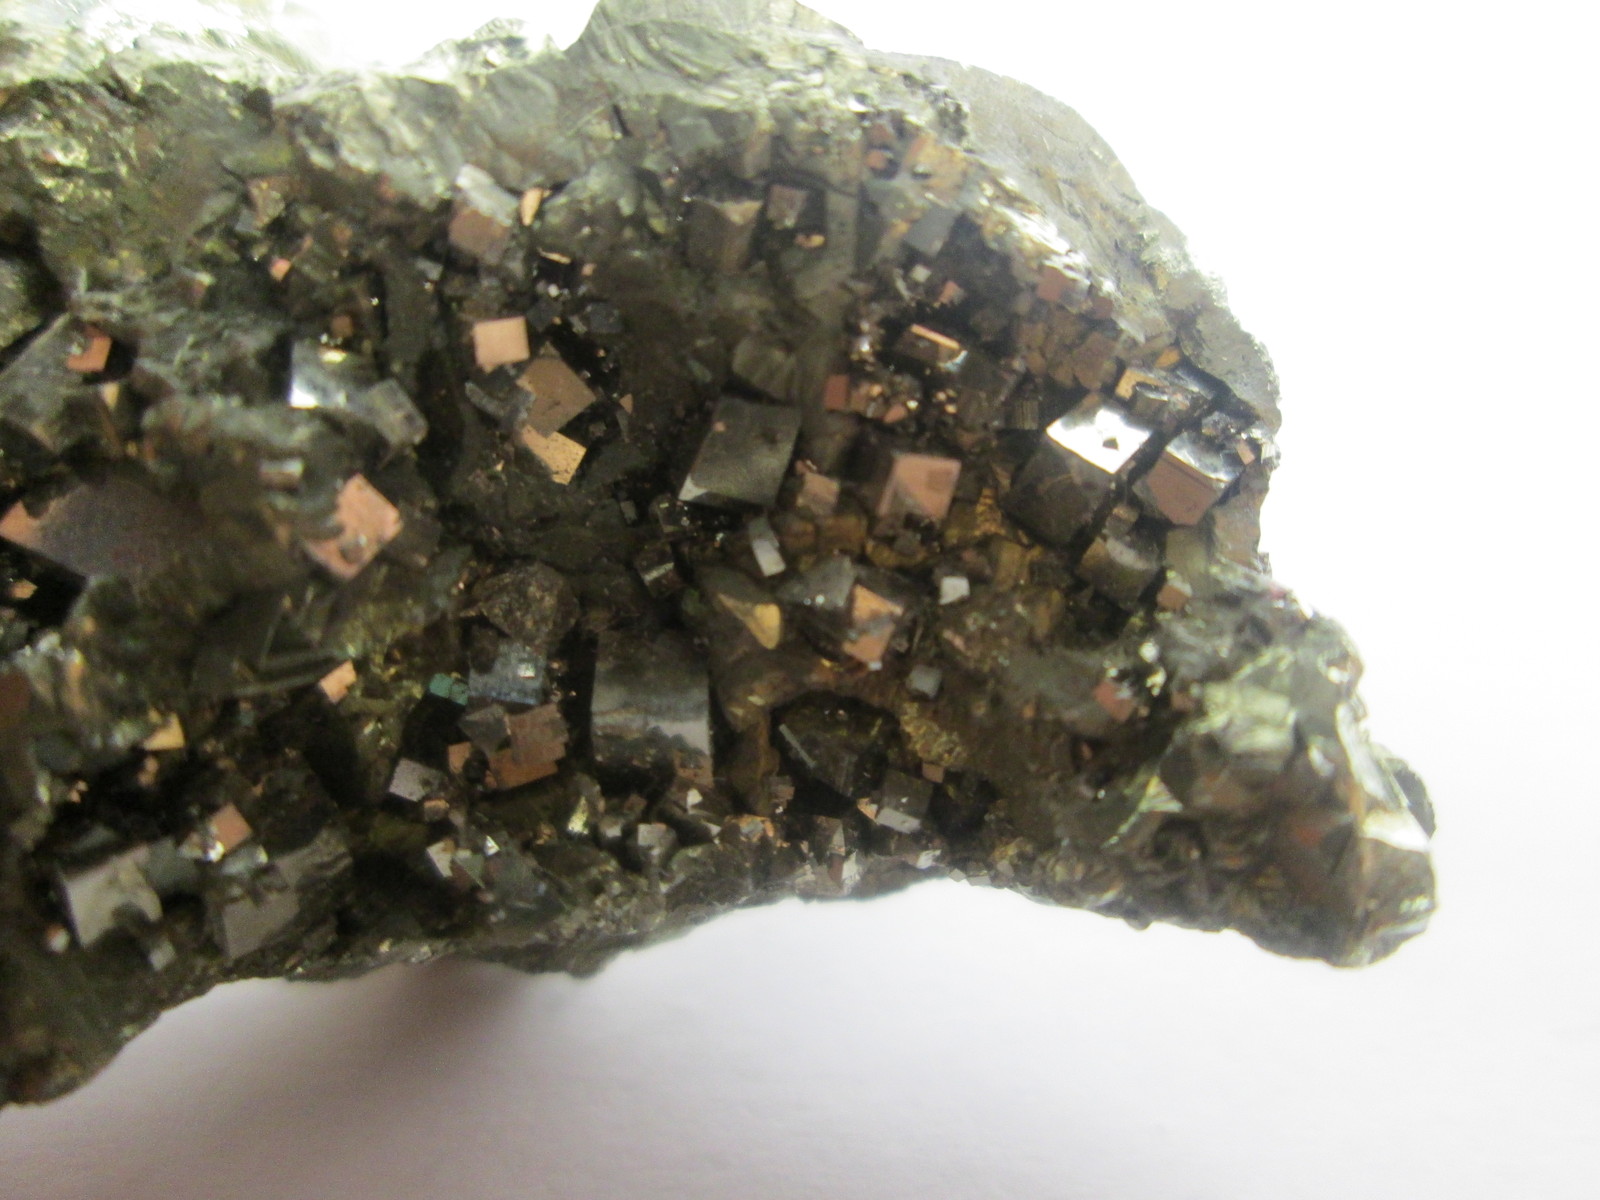 New in my collection. - Longpost, Geology, Geologists, The photo, Collection, Minerals, My